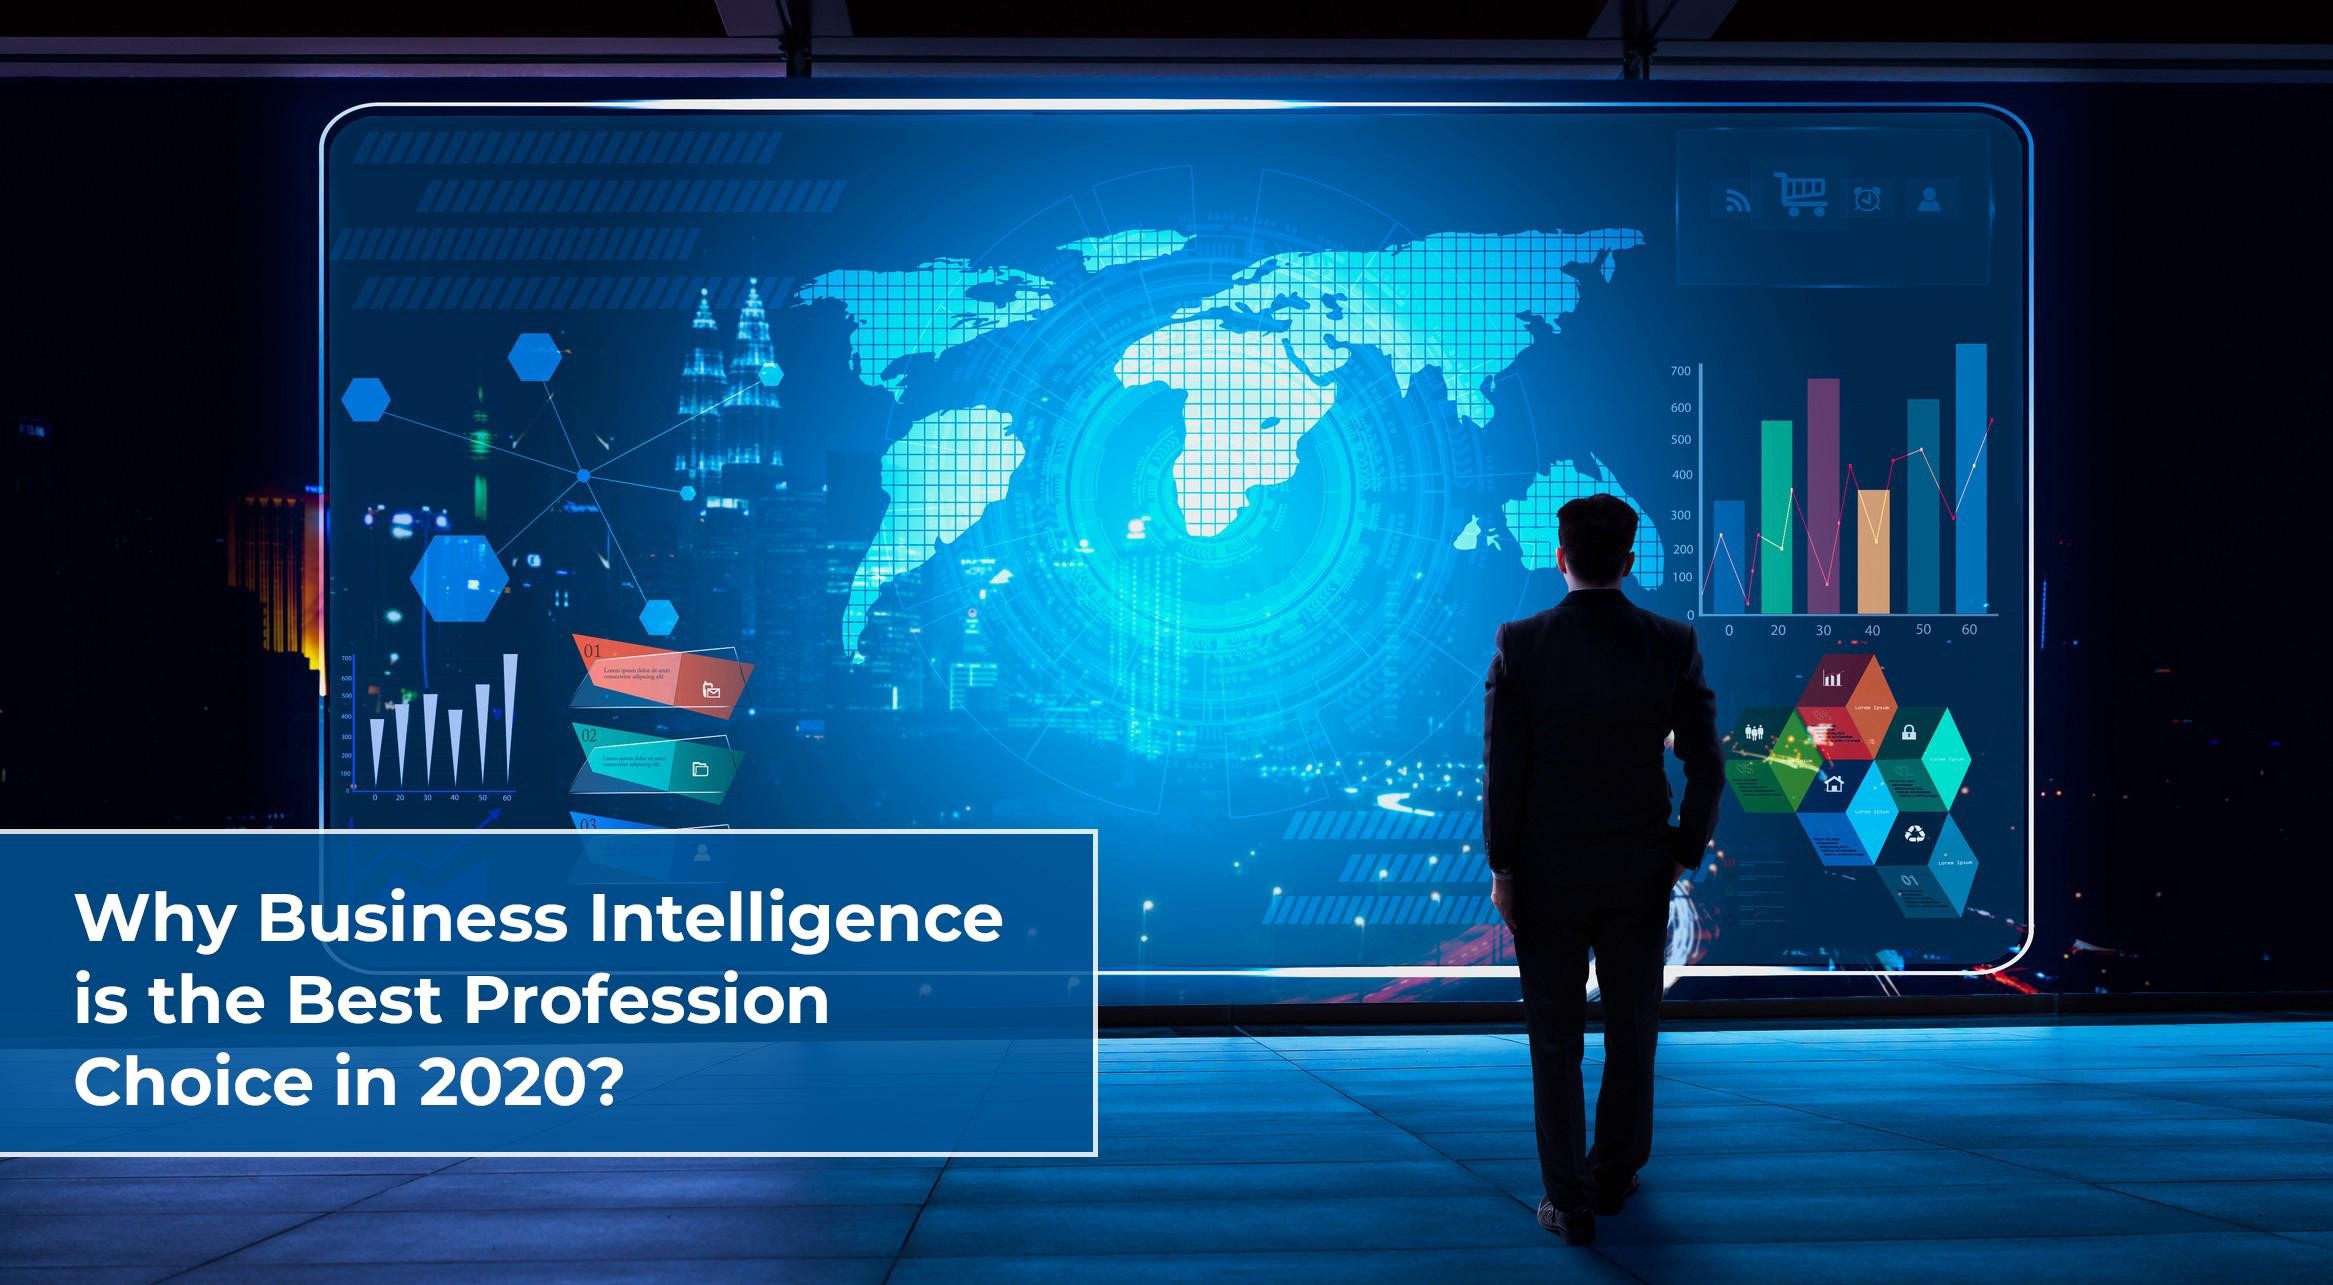 Scope of Business Intelligence in Future as Good Carrier Option - 2020